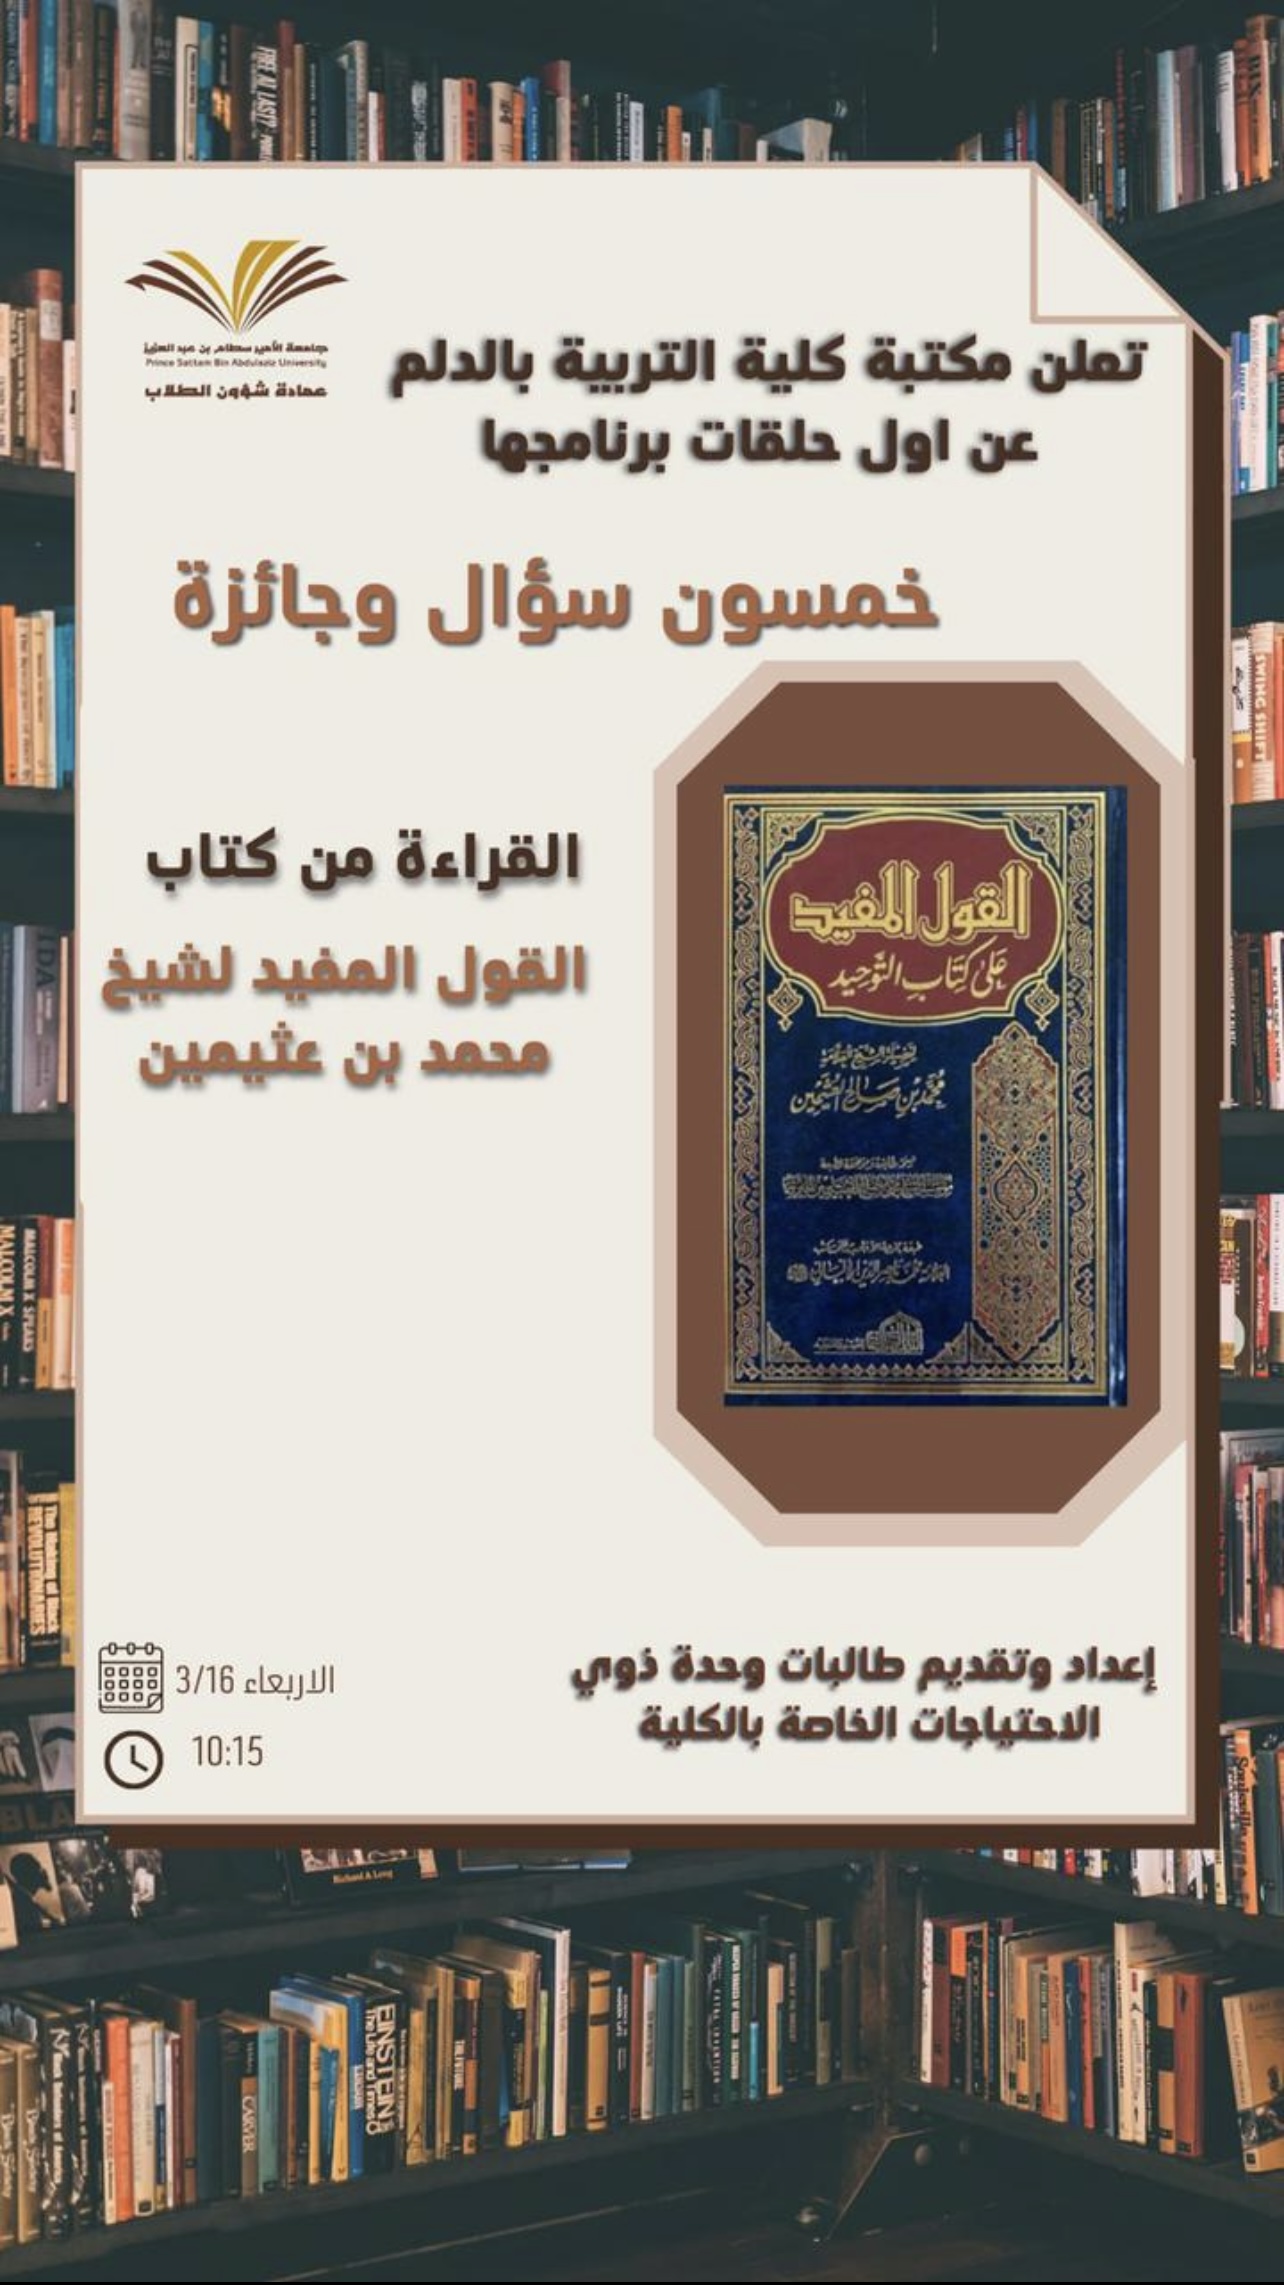 Fifty Questions and Prize Program - (First Episode) Reading from the book (The Useful Saying of Sheikh Muhammad bin Saleh Al-Othaymeen)